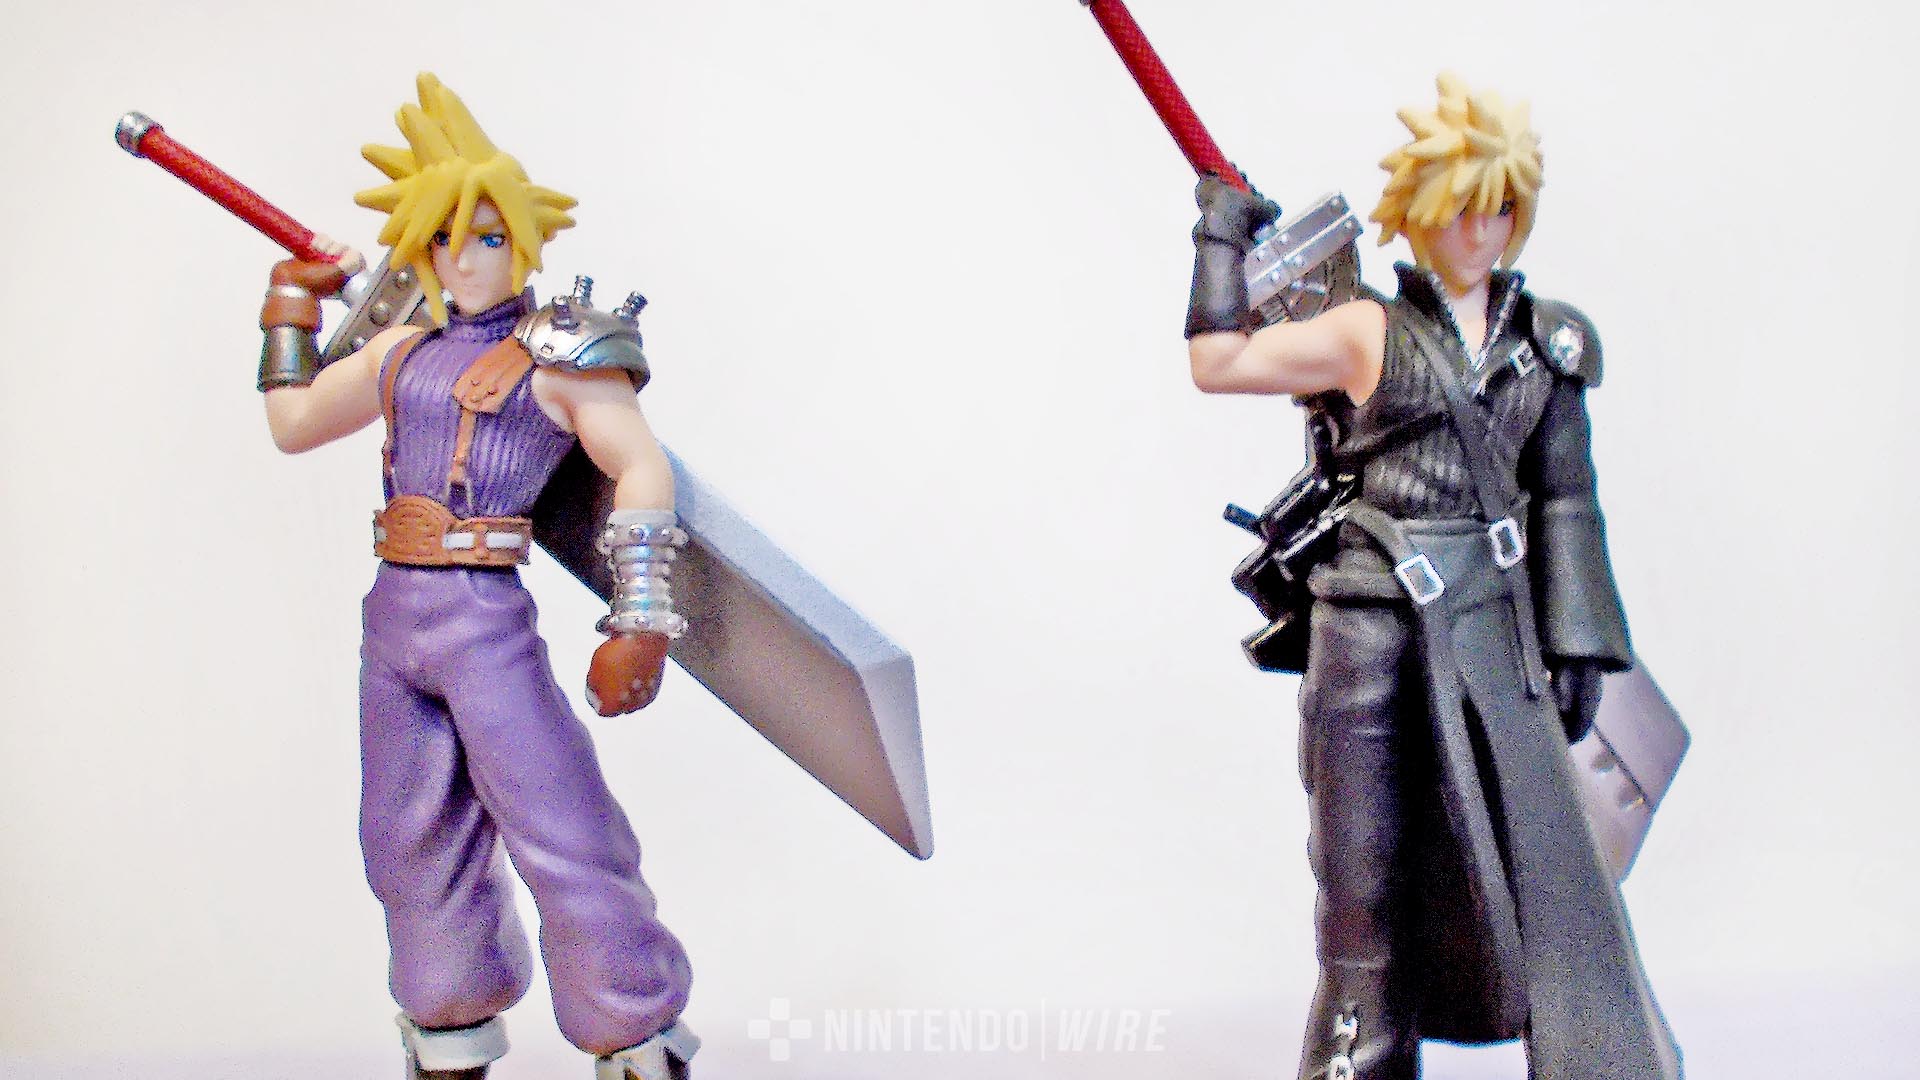 Photo gallery: Cloud Player 1 and Player 2 amiibo | Nintendo Wire1920 x 1080